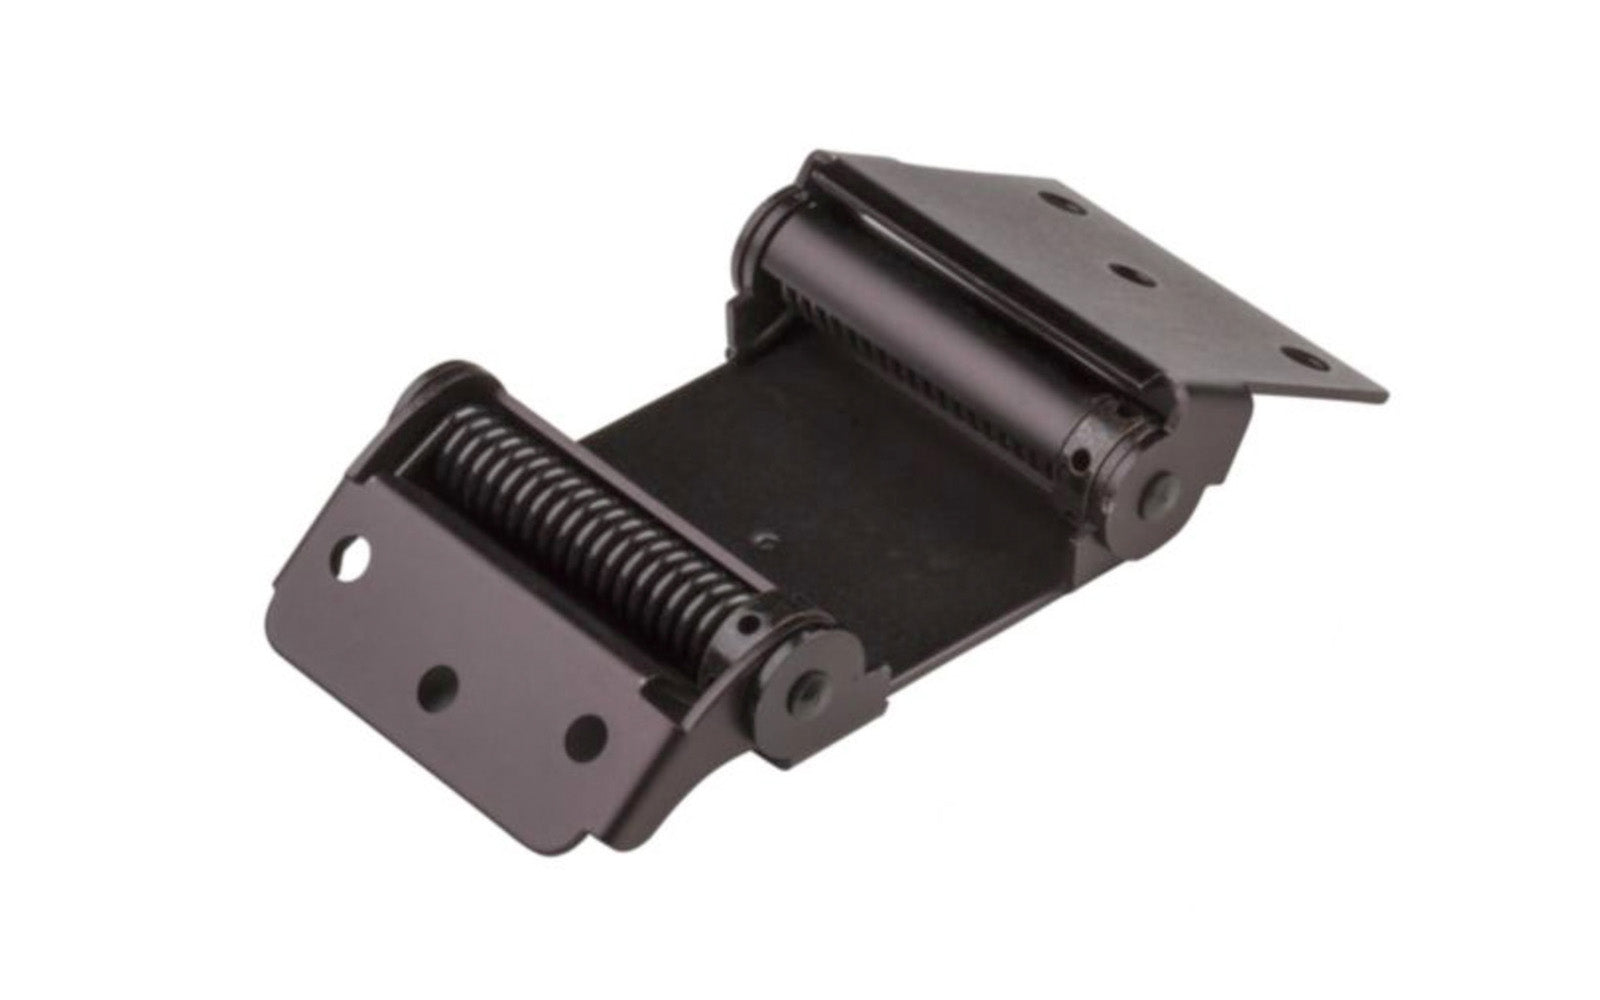 This 3" Double-Action Spring Hinge provides two way access for swinging doors. The tight pin is adjustable to provide desired closing speed for a variety of swinging-door applications. Oil Rubbed Bronze Finish on steel material. Sold as a single hinge in pack.  National Hardware Model No. N100-052. 886780014341